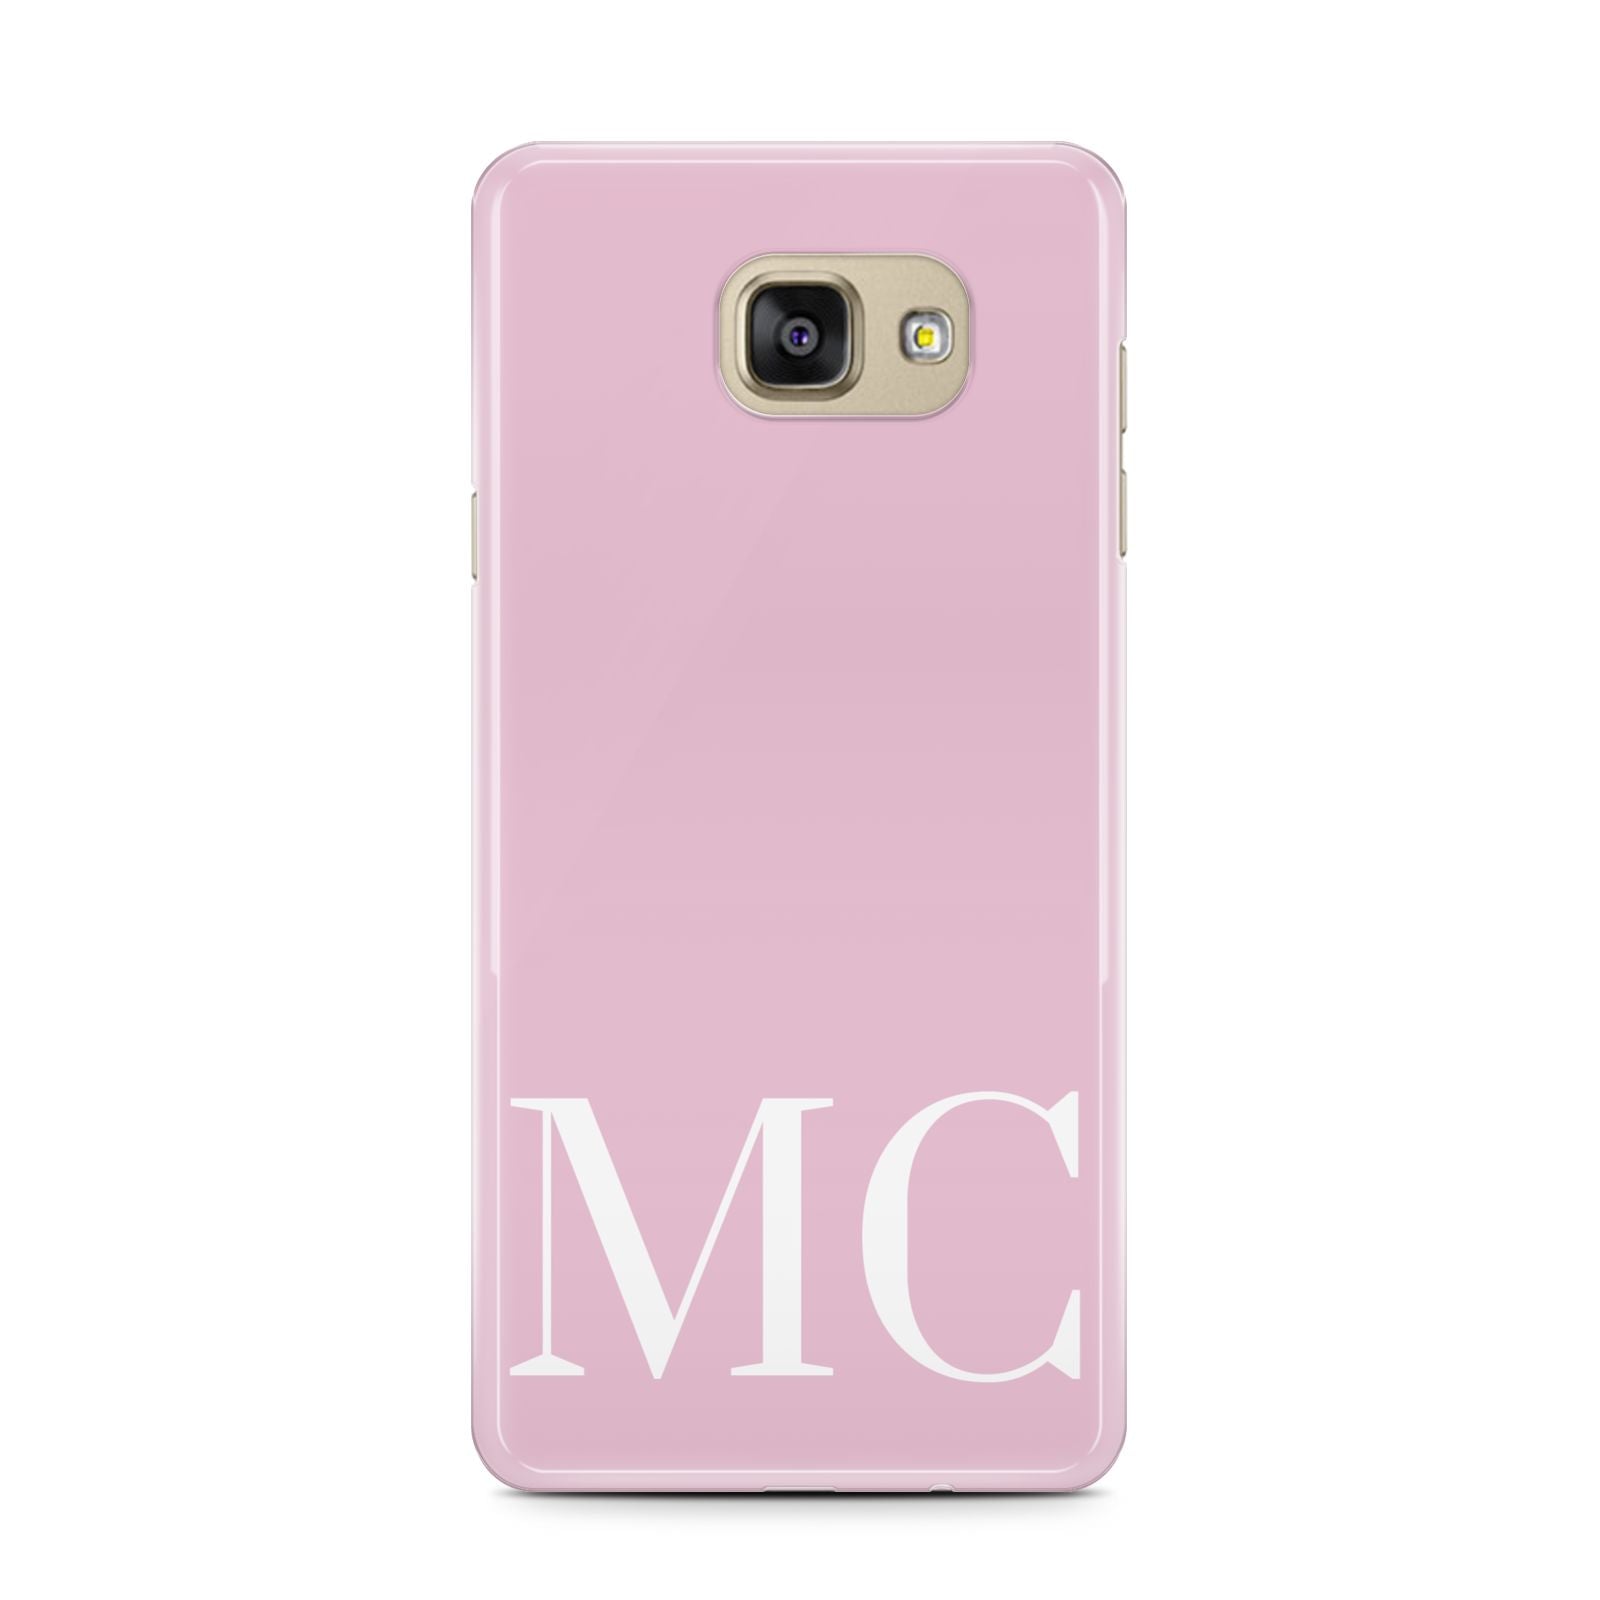 Initials Personalised 2 Samsung Galaxy A7 2016 Case on gold phone